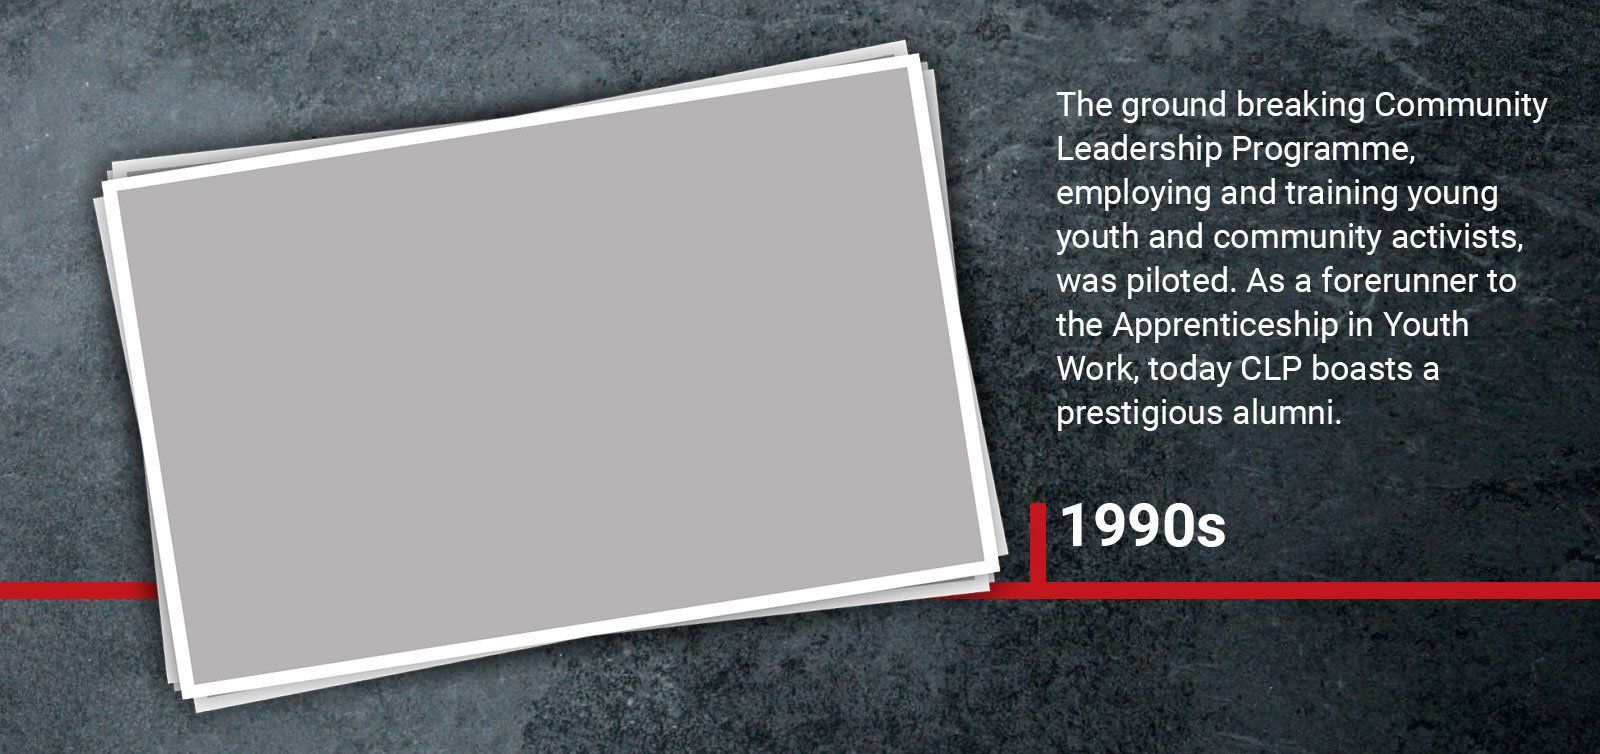 1990s The ground breaking Community Leadership Programme, employing and training young youth and community activists, was piloted. As a forerunner to the Apprenticeship in Youth Work, today CLP boasts a prestigious alumni.